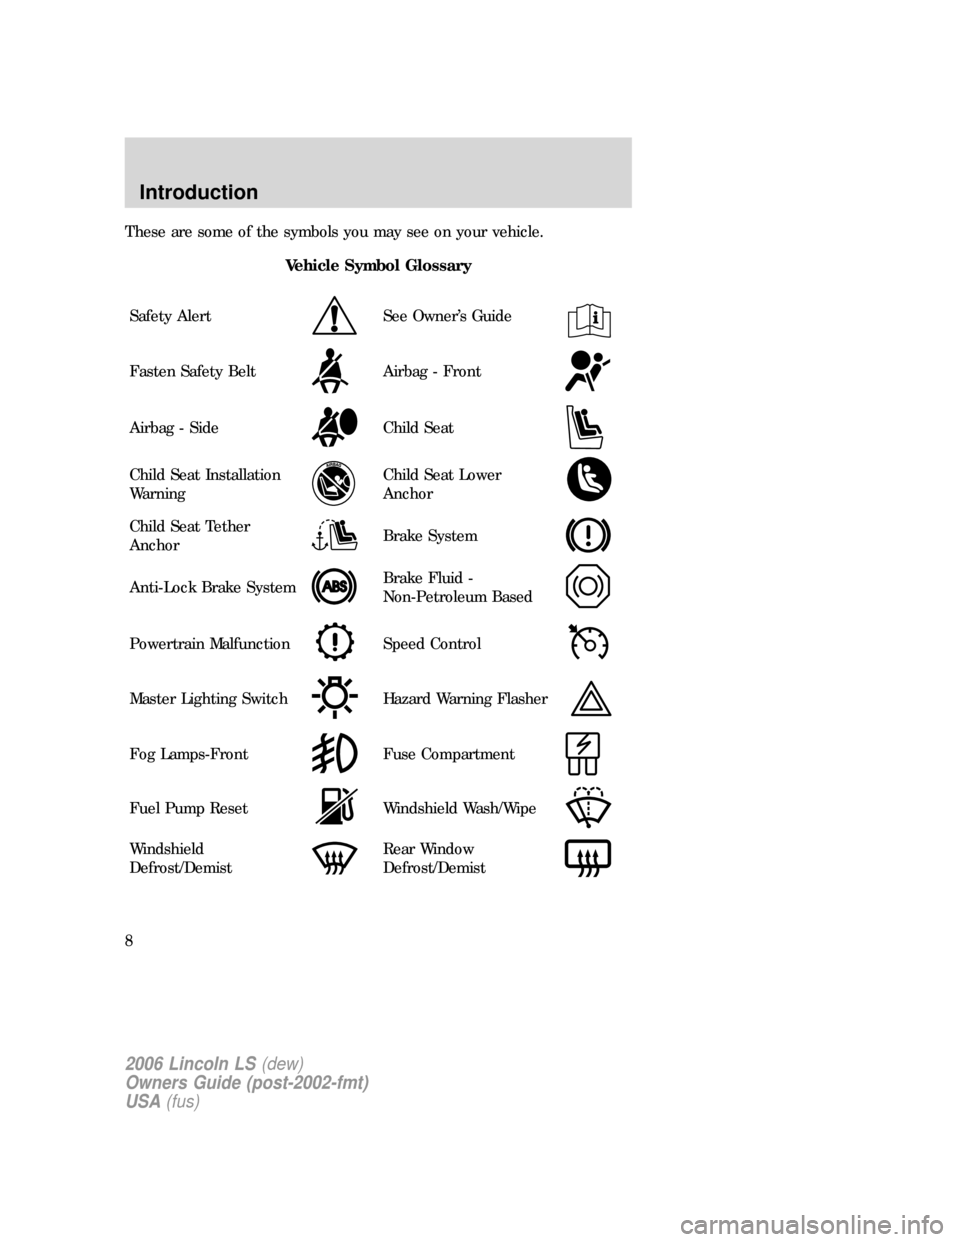 LINCOLN LS 2006  Owners Manual These are some of the symbols you may see on your vehicle.
Vehicle Symbol Glossary
Safety Alert
See Owner’s Guide
Fasten Safety BeltAirbag - Front
Airbag - SideChild Seat
Child Seat Installation
War